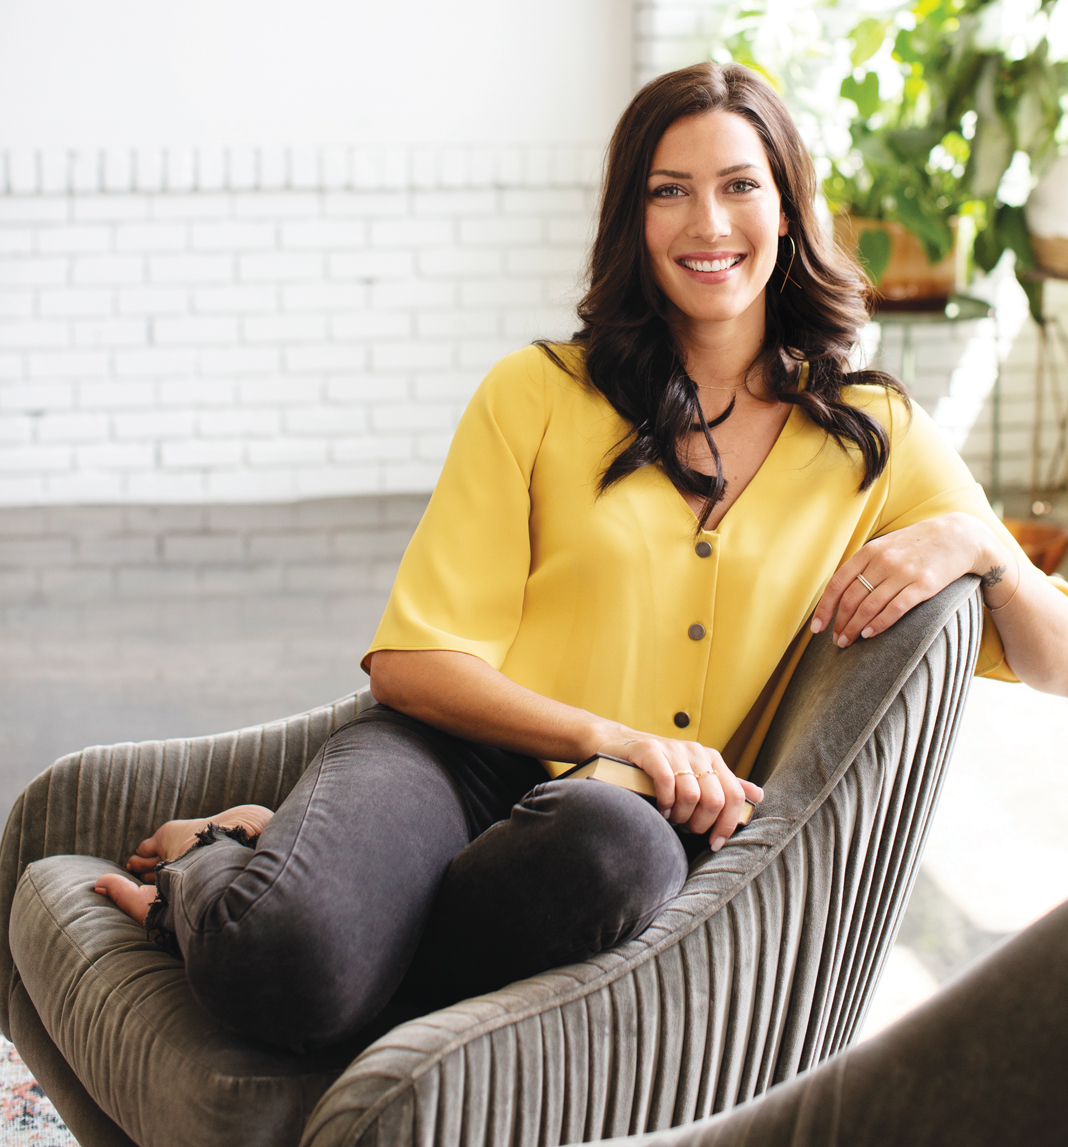 A portrait of Becca Kufrin sitting on a couch.